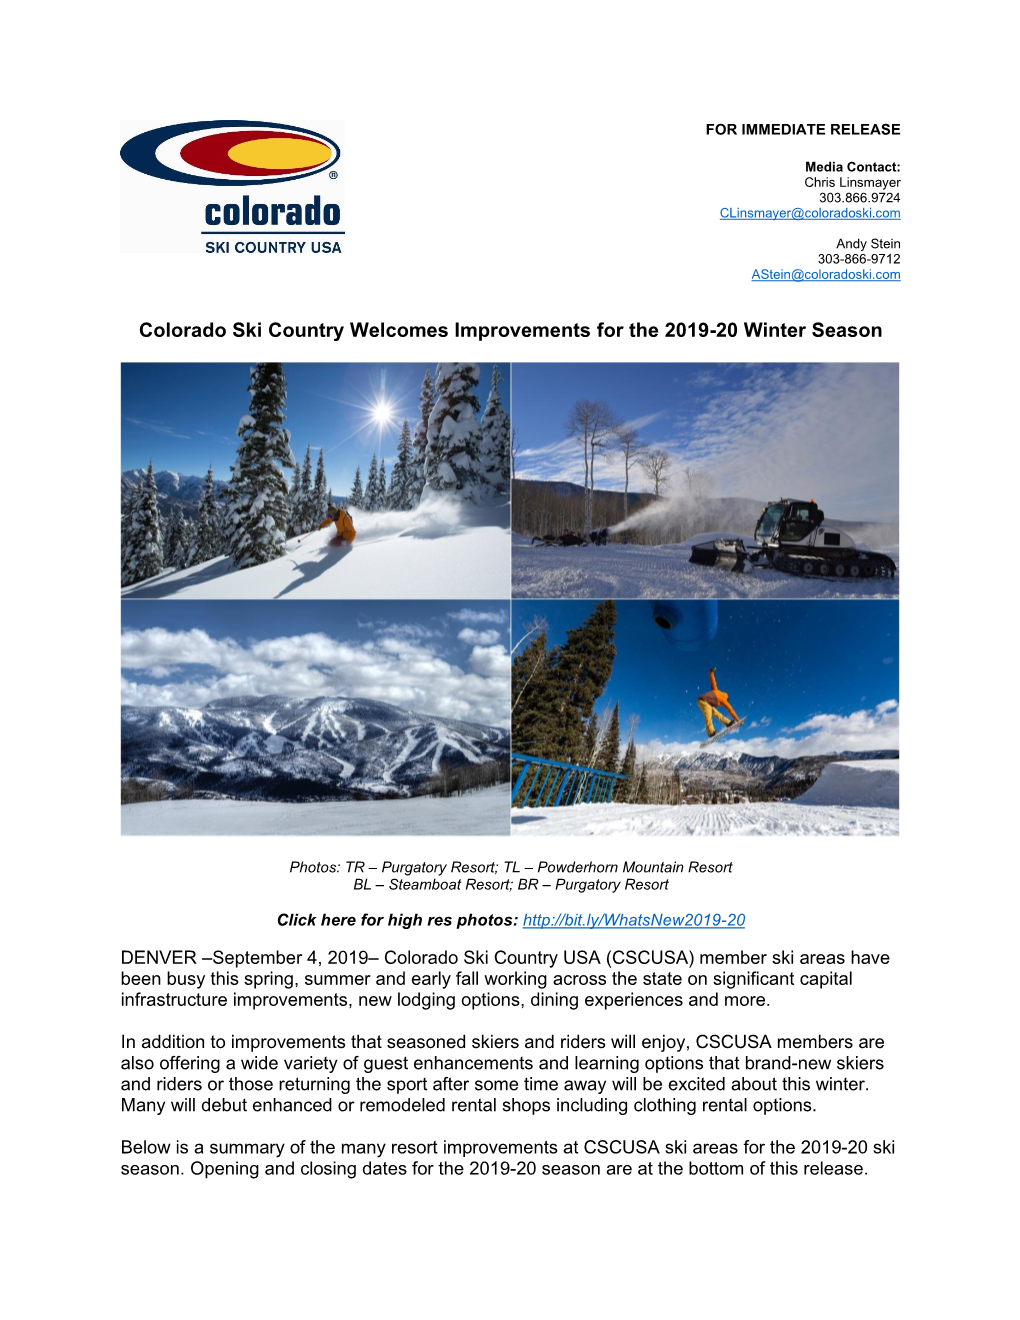 Colorado Ski Country Welcomes Improvements for the 2019-20 Winter Season